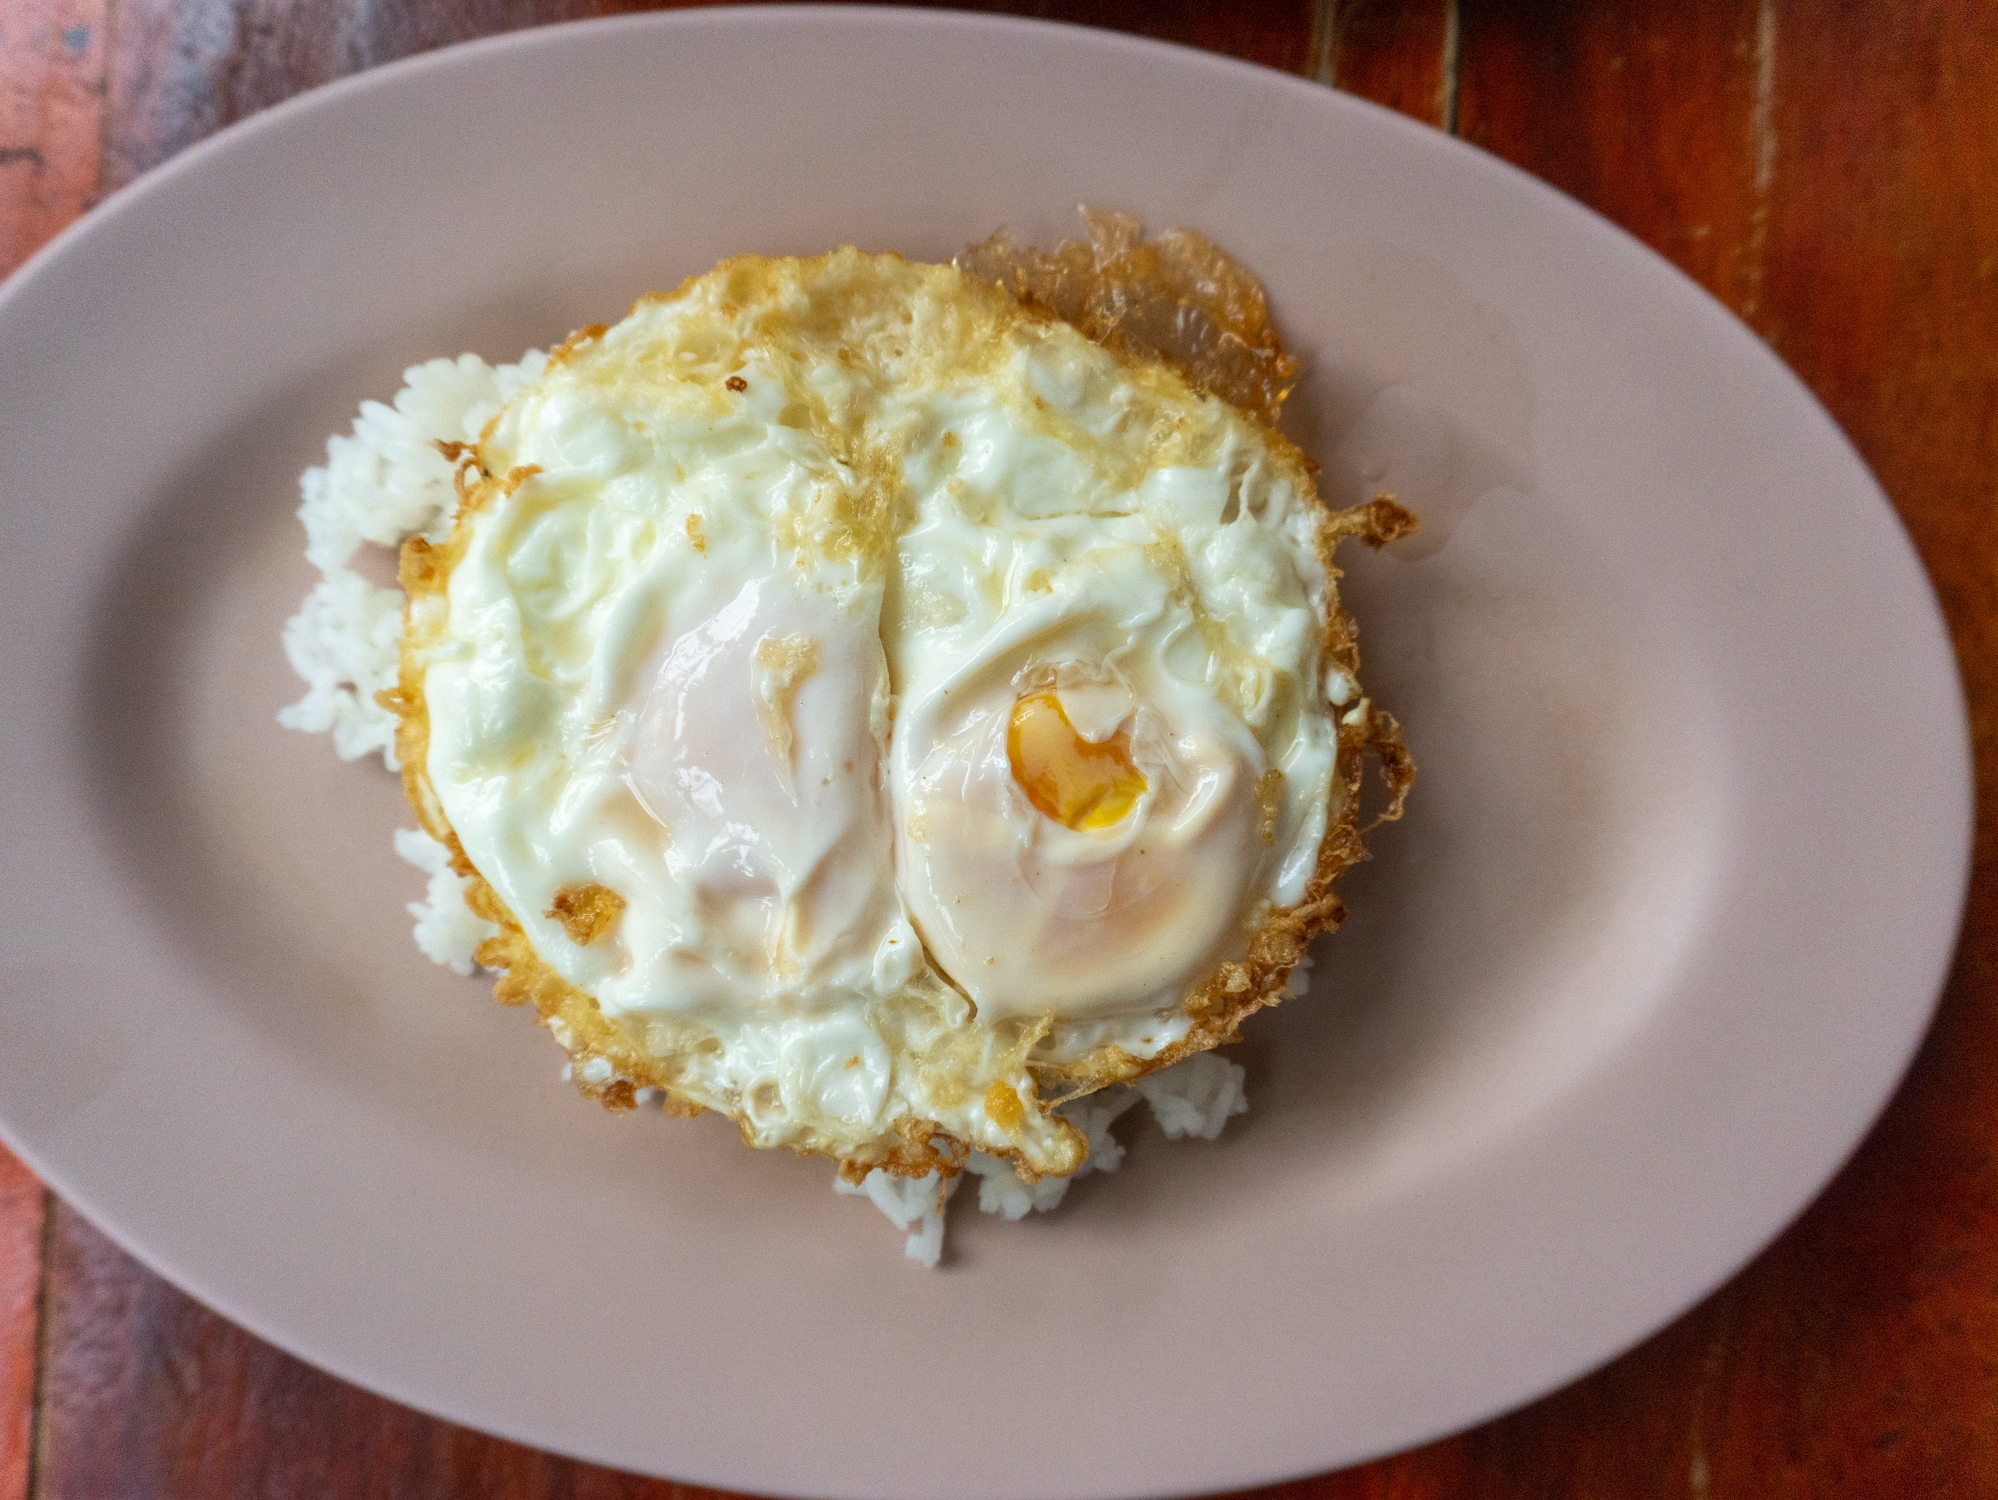 Plate with rice topped with a fried egg on a wooden table